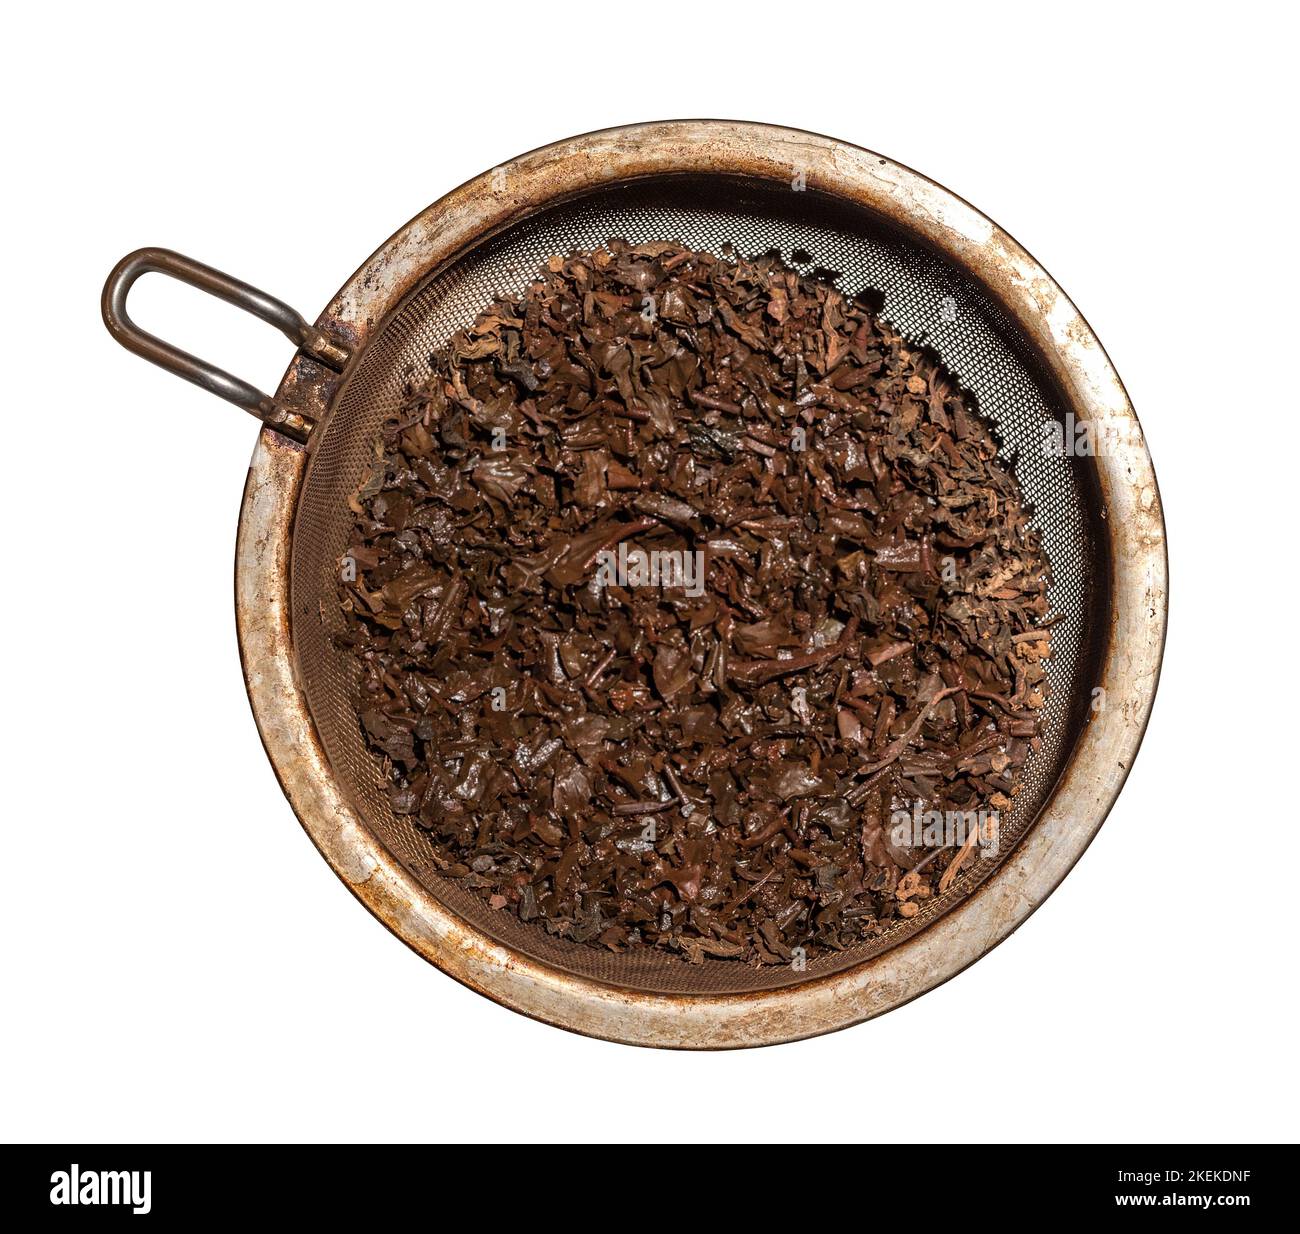 brewed wet tea leaves in a metal strainer, isolated against a white background Stock Photo